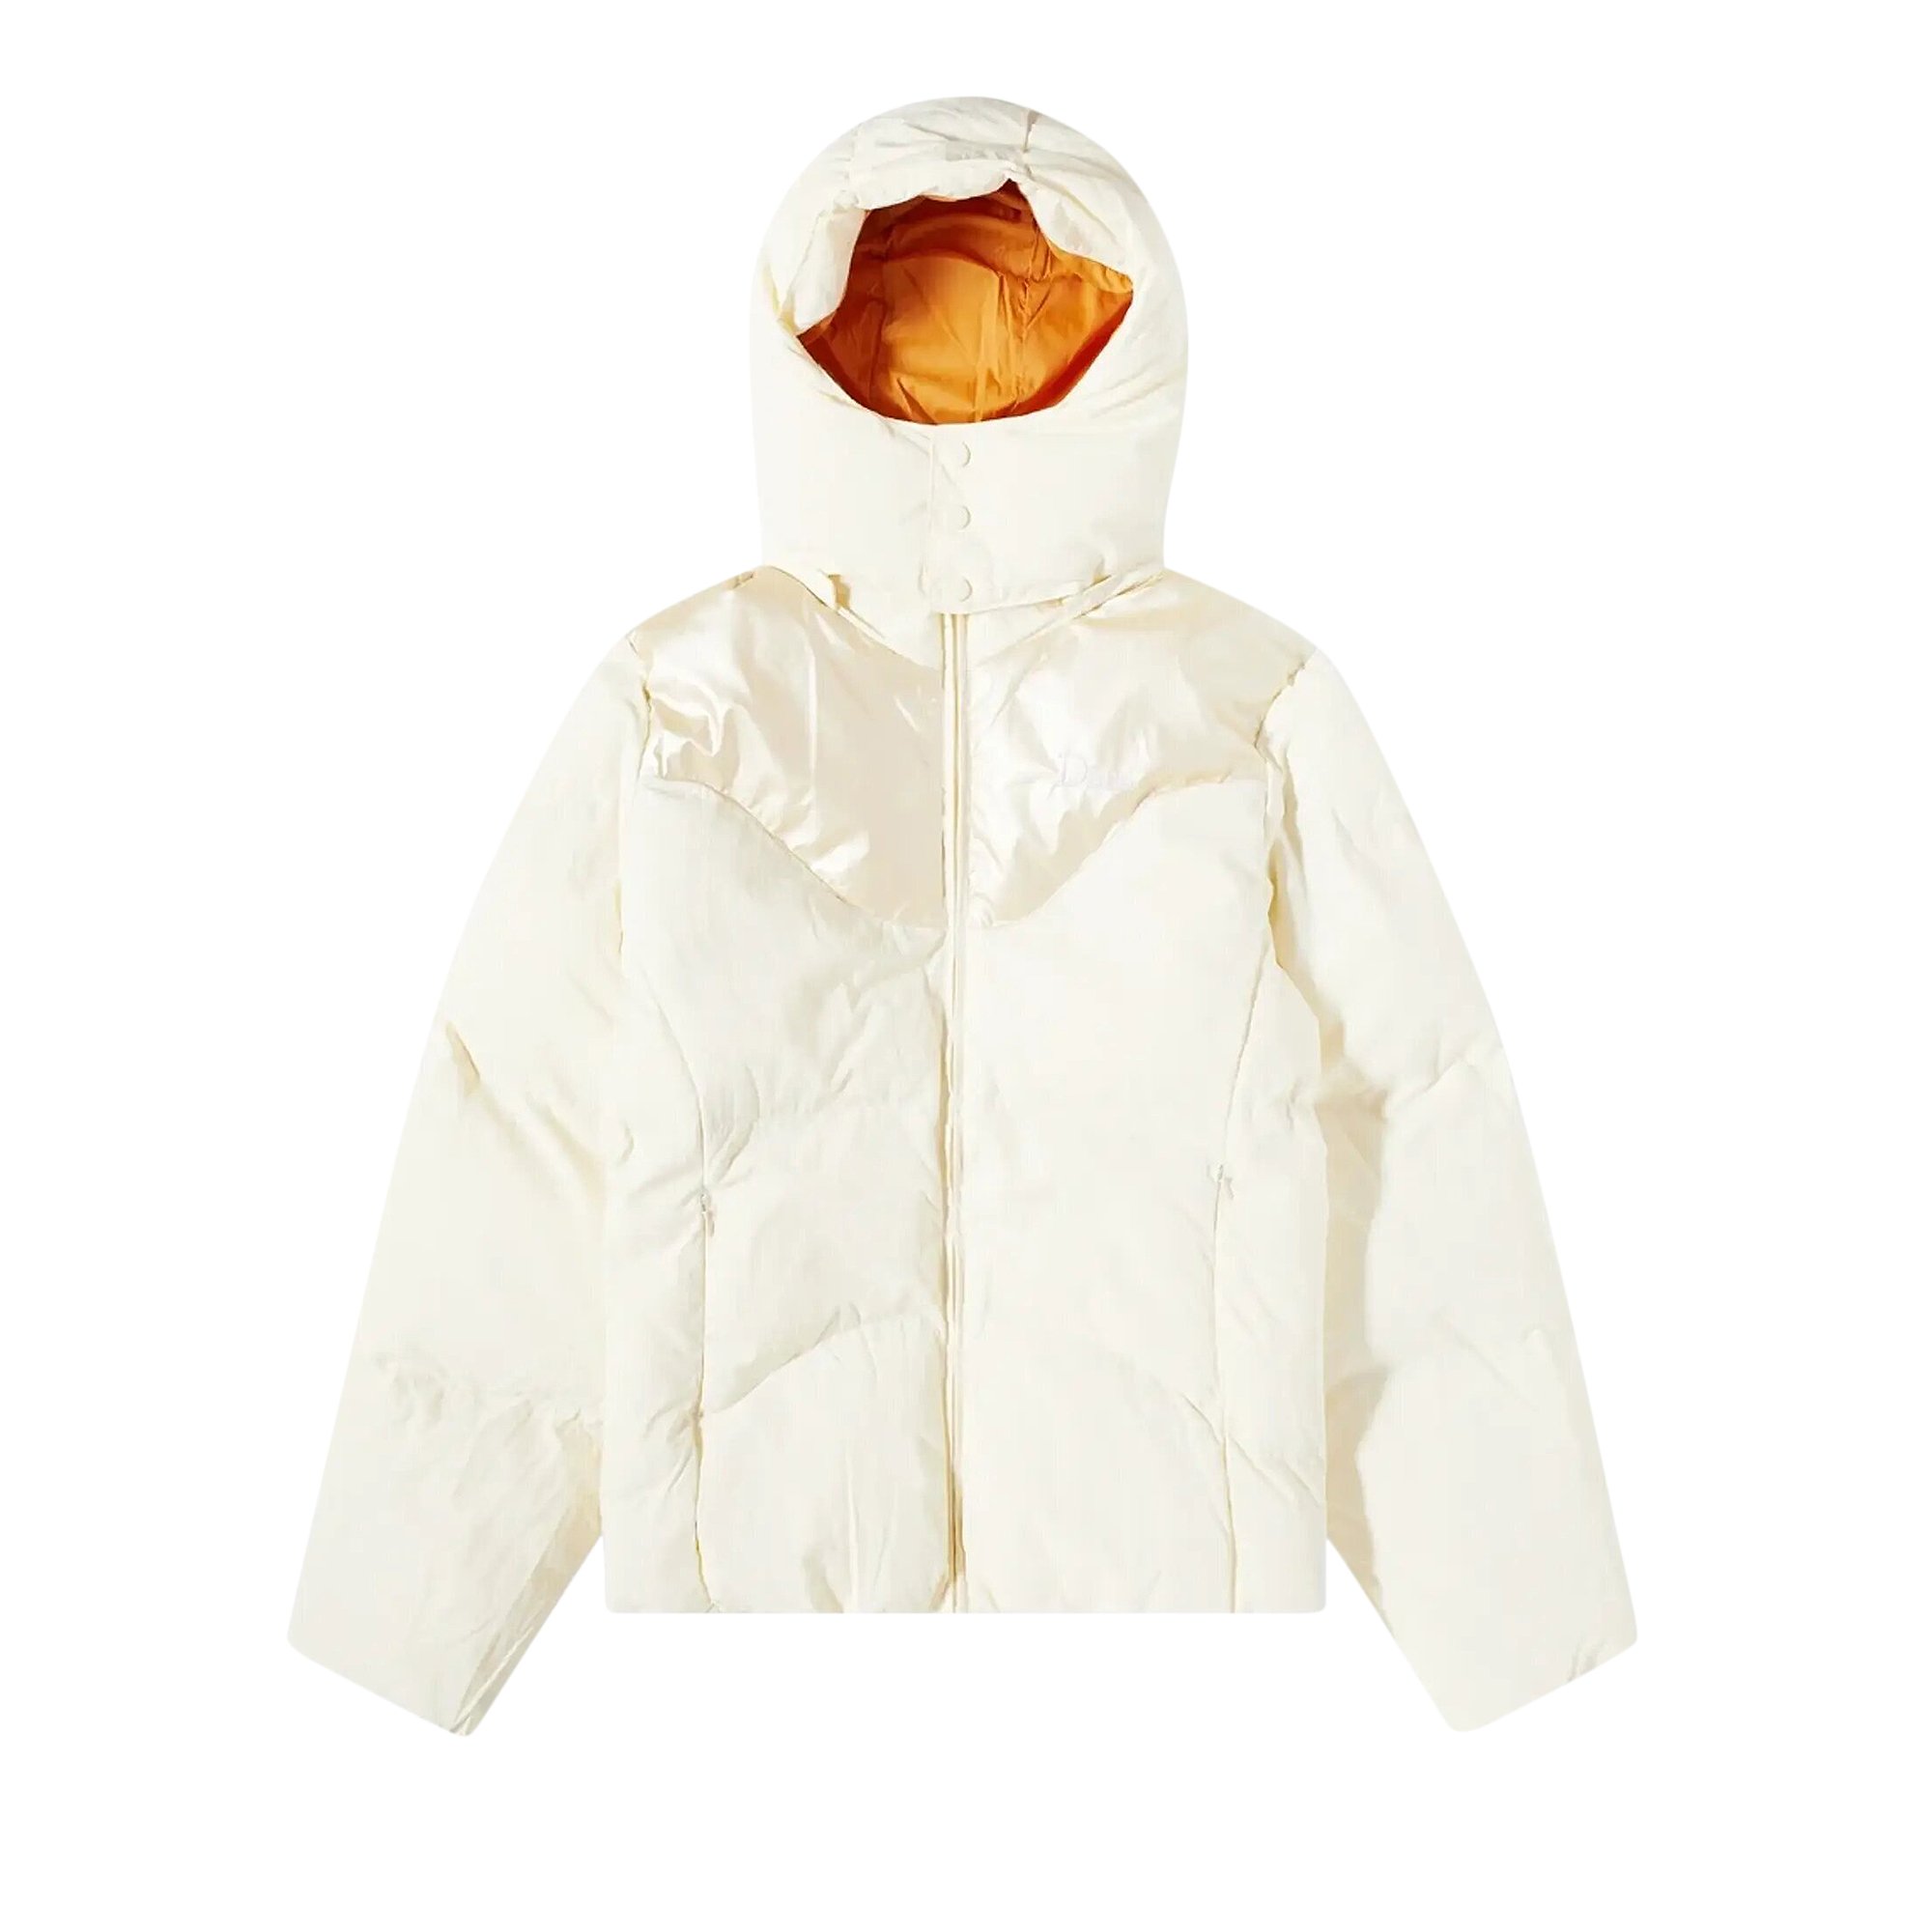 Buy Dime Contrast Puffer Jacket 'Off White' - DIMED2F1OWHT | GOAT